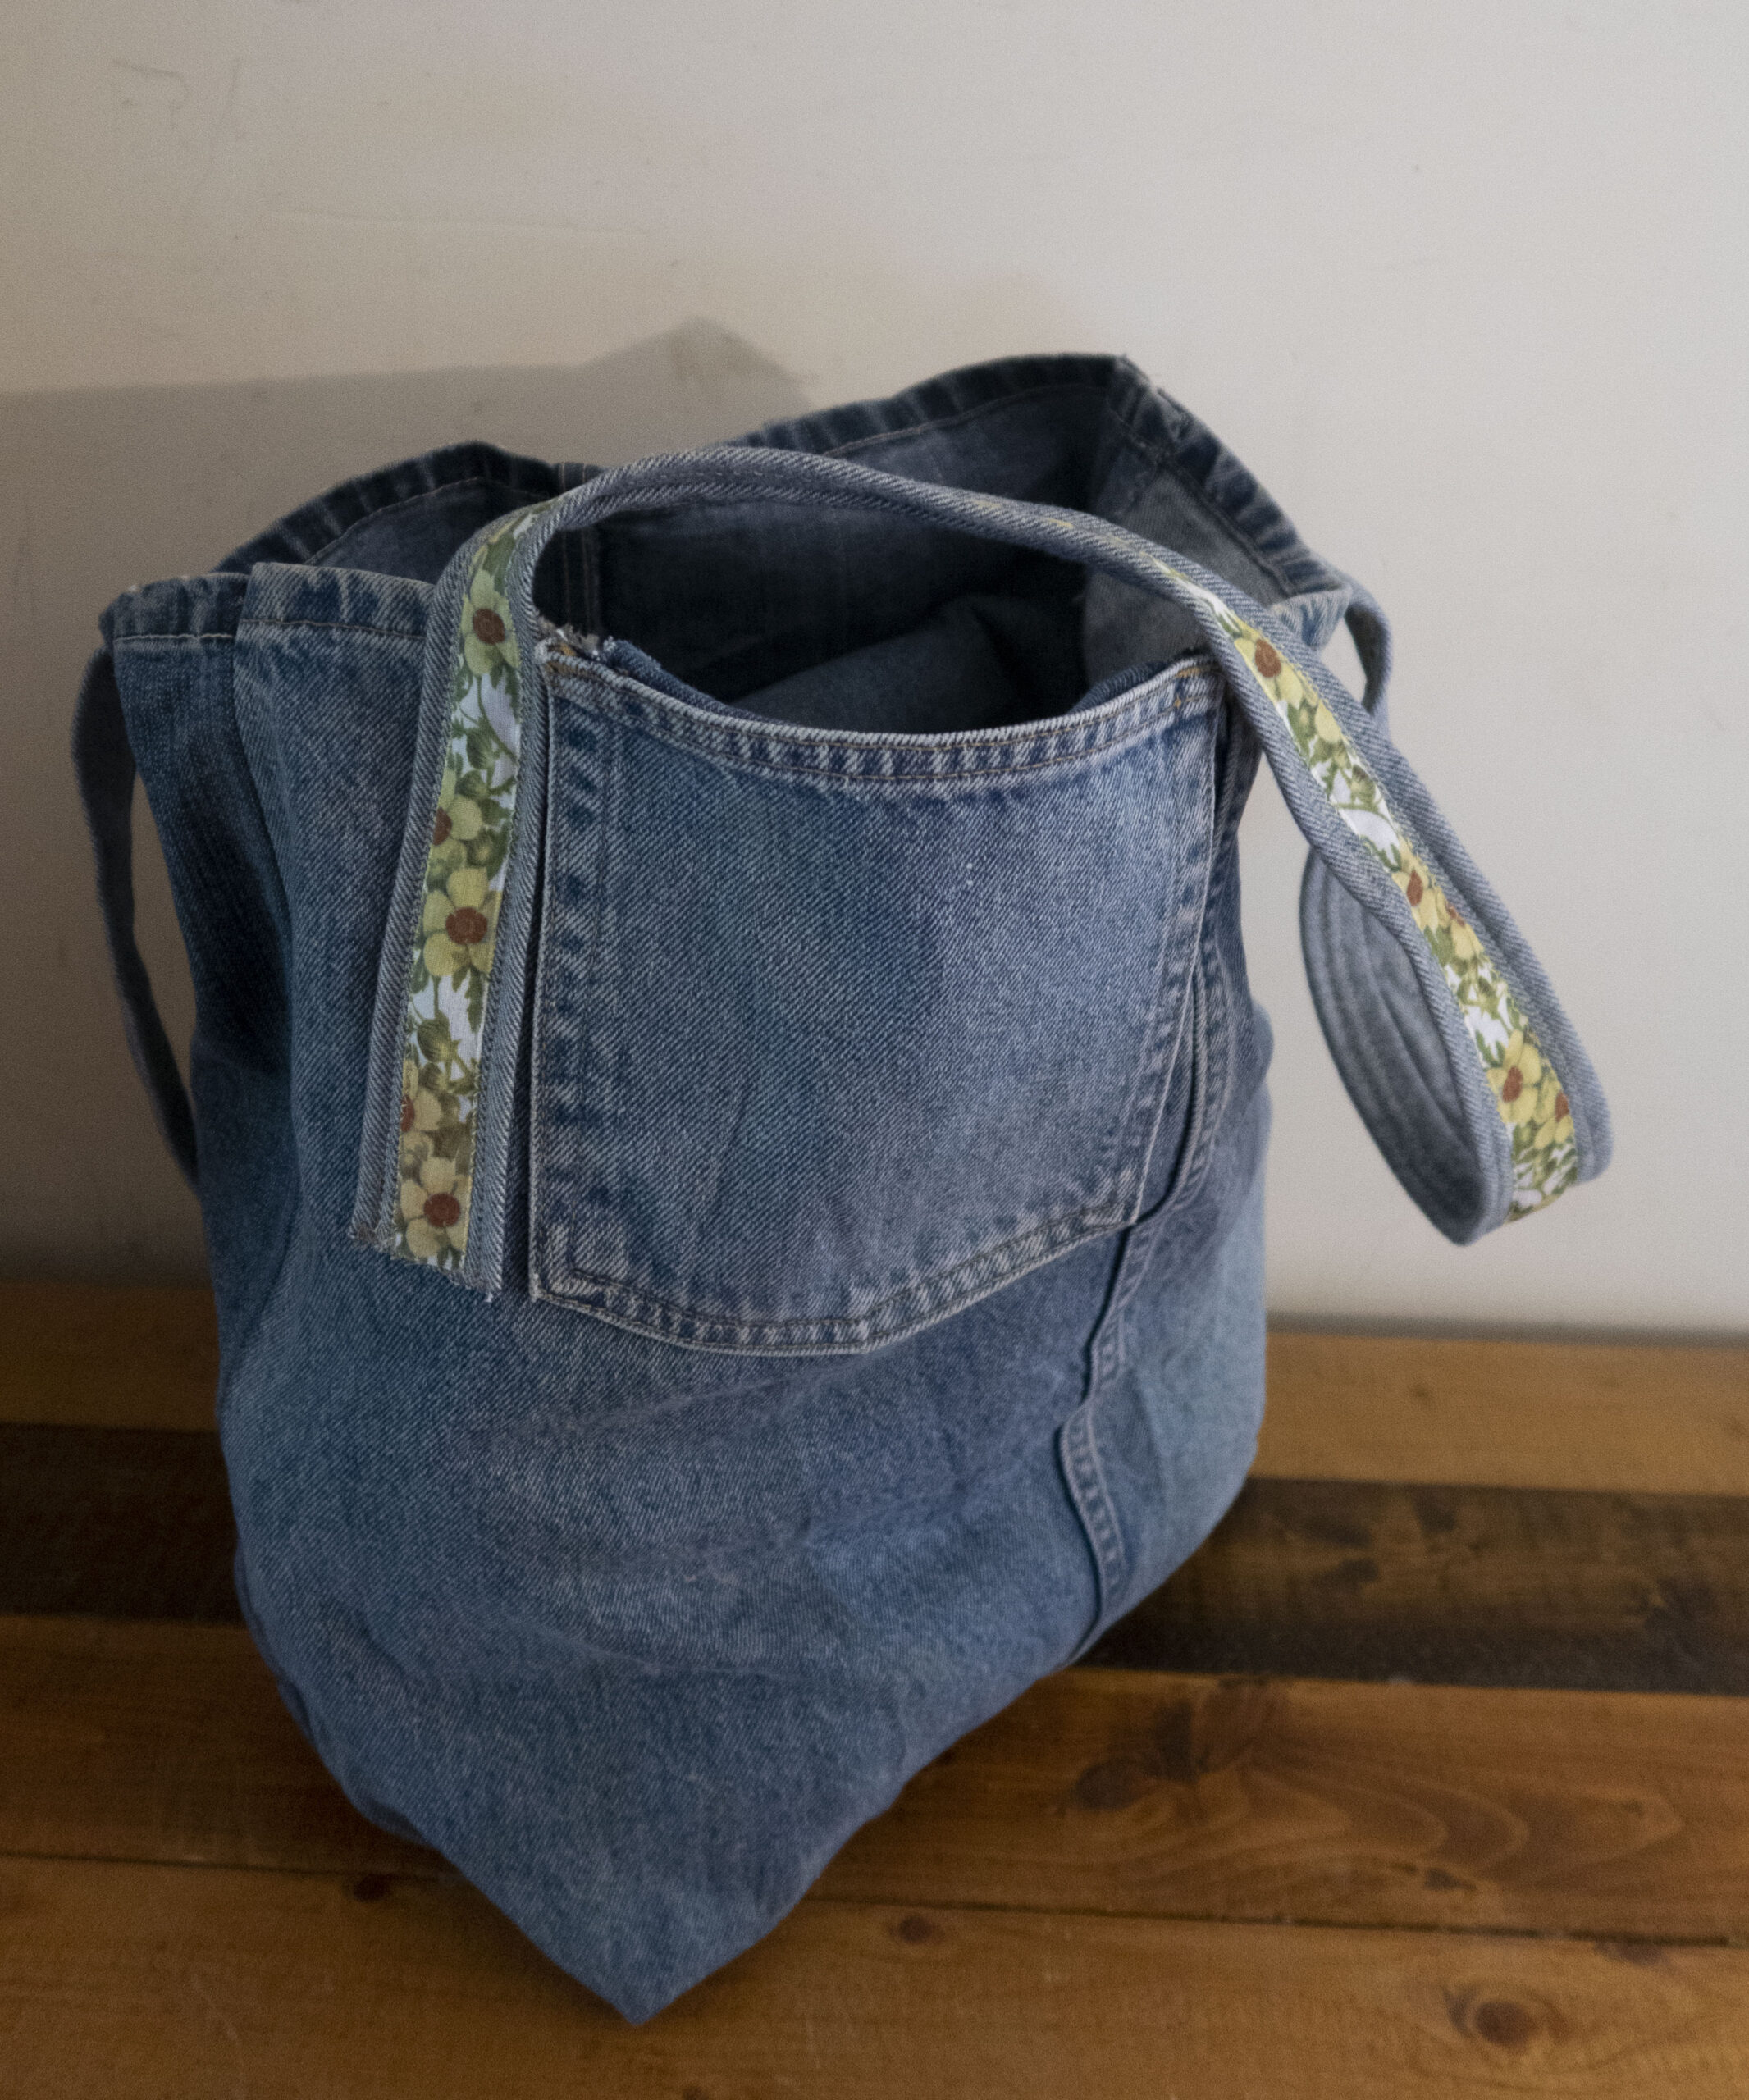 Stitch What You've Grown Gardening Tote Bag Diy Kit By Chasing Threads